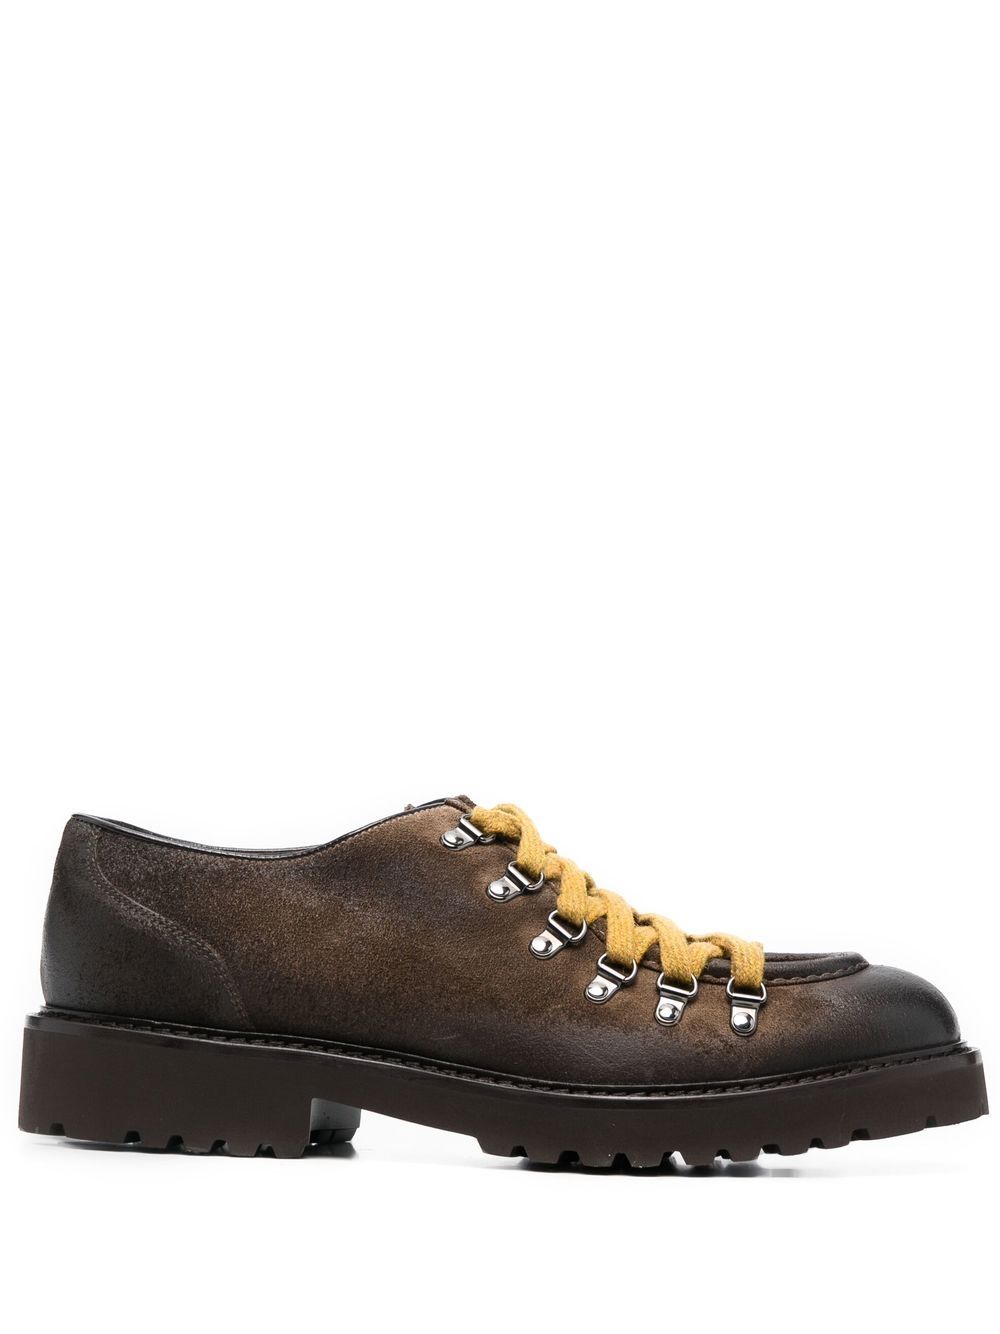 Doucal's suede lace-up shoes - Brown von Doucal's